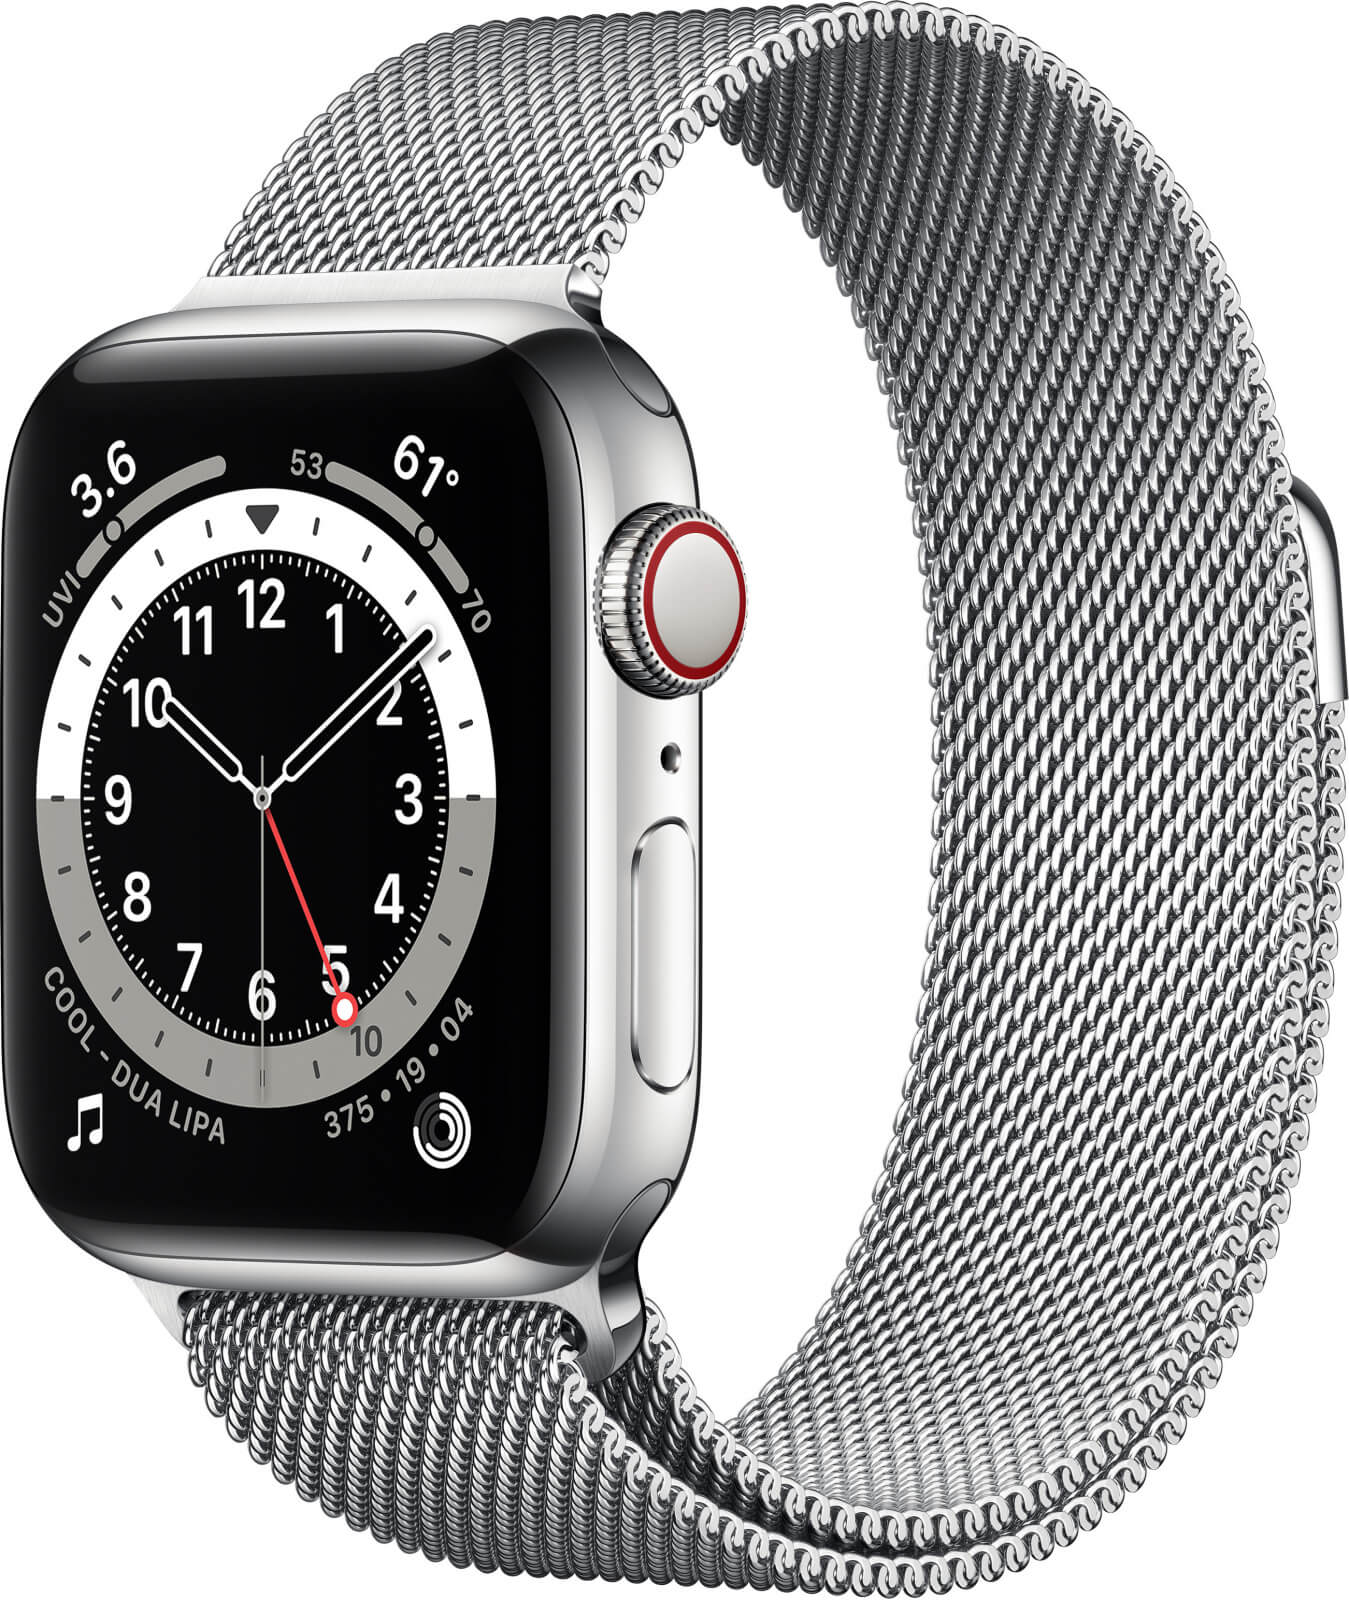 Apple Apple Watch Series 6 GPS + Cellular, 44mm Silver Stainless Steel Case with Silver Milanese Loop